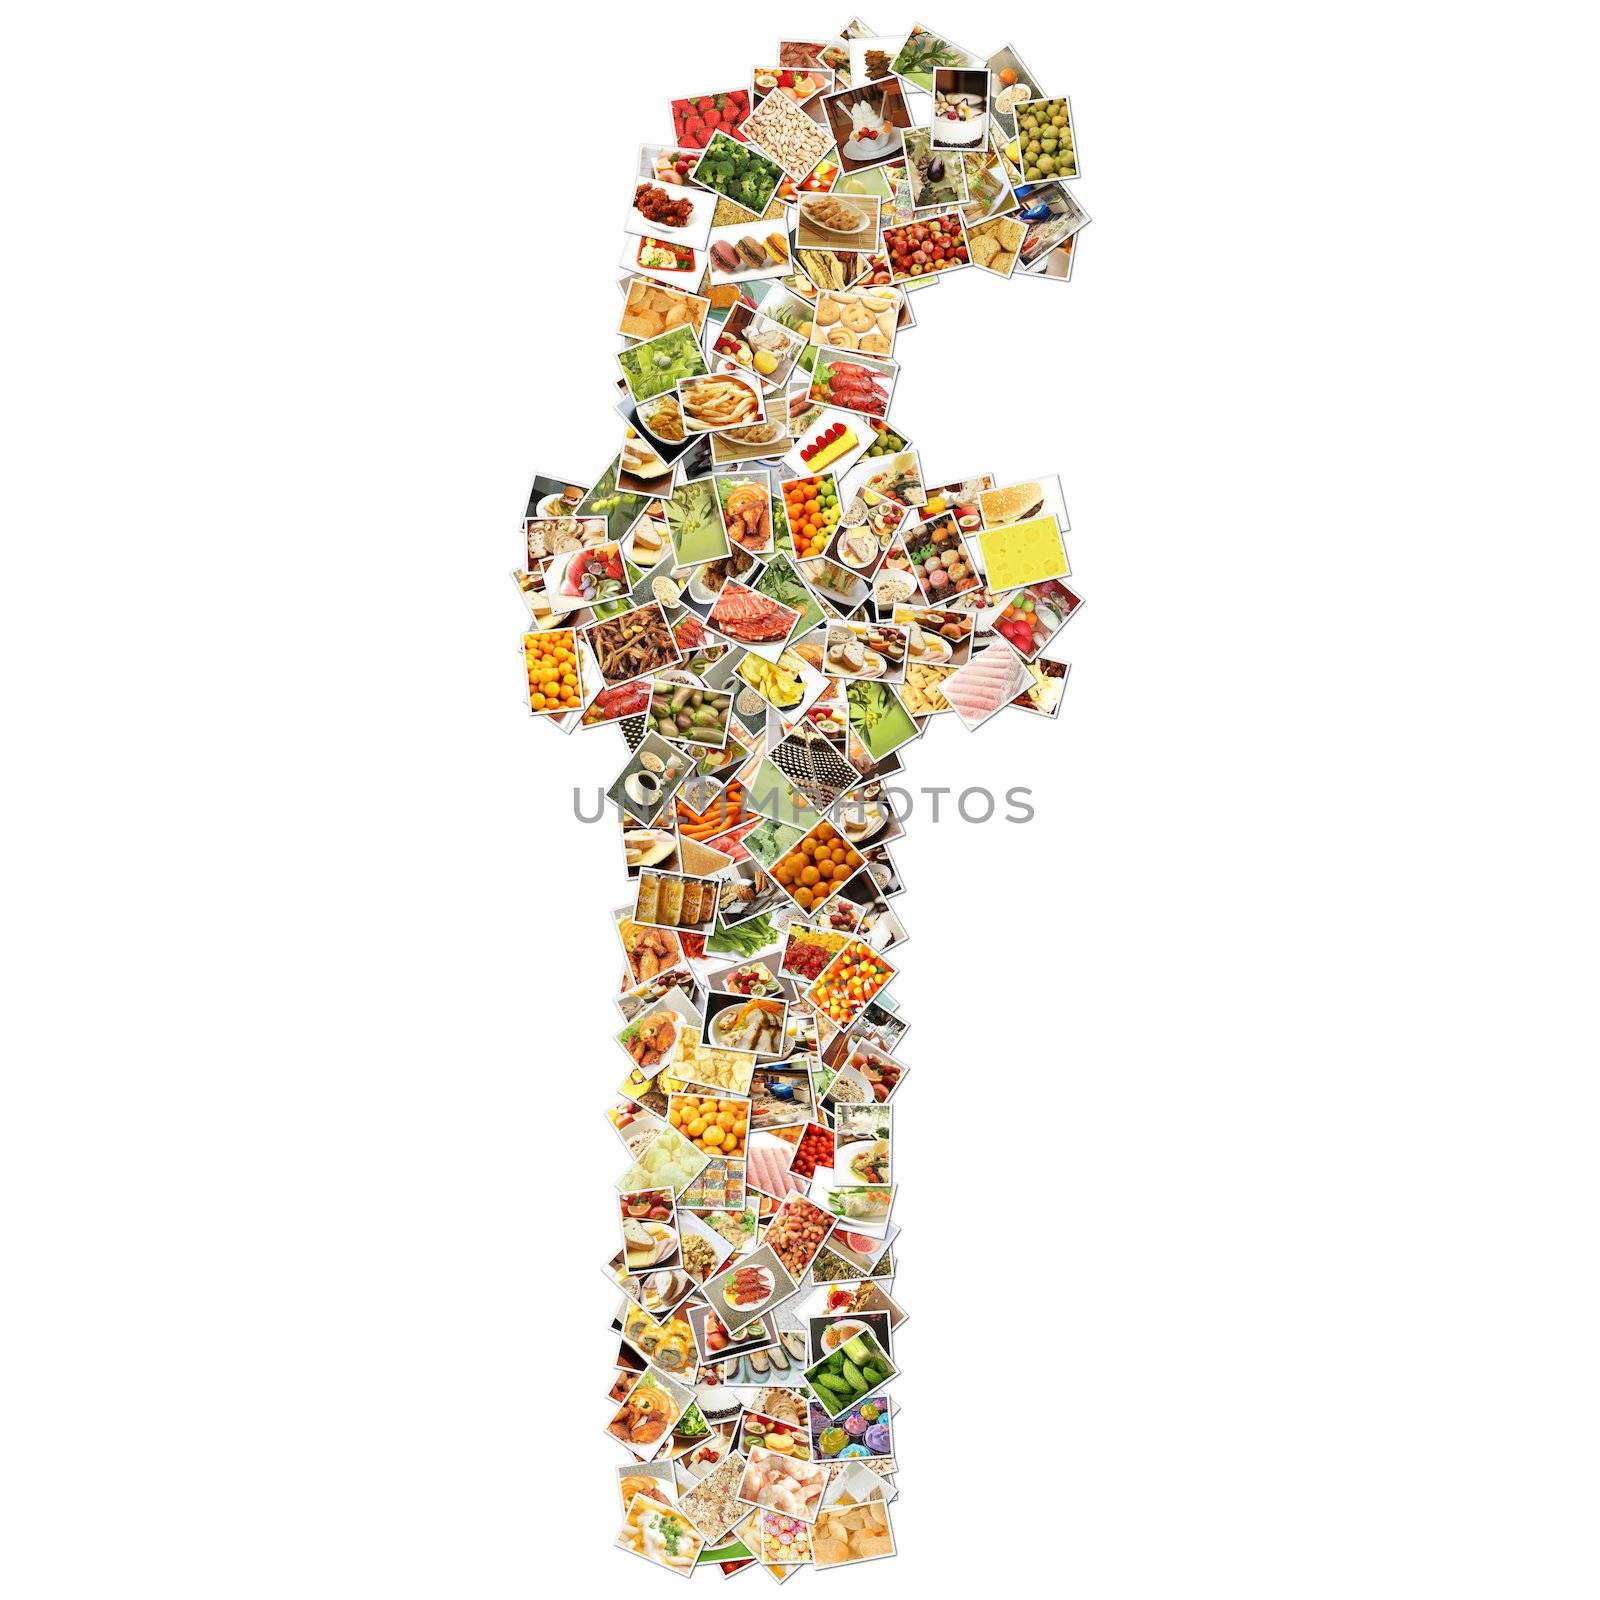 Food Art F Lowercase Shape Collage Abstract